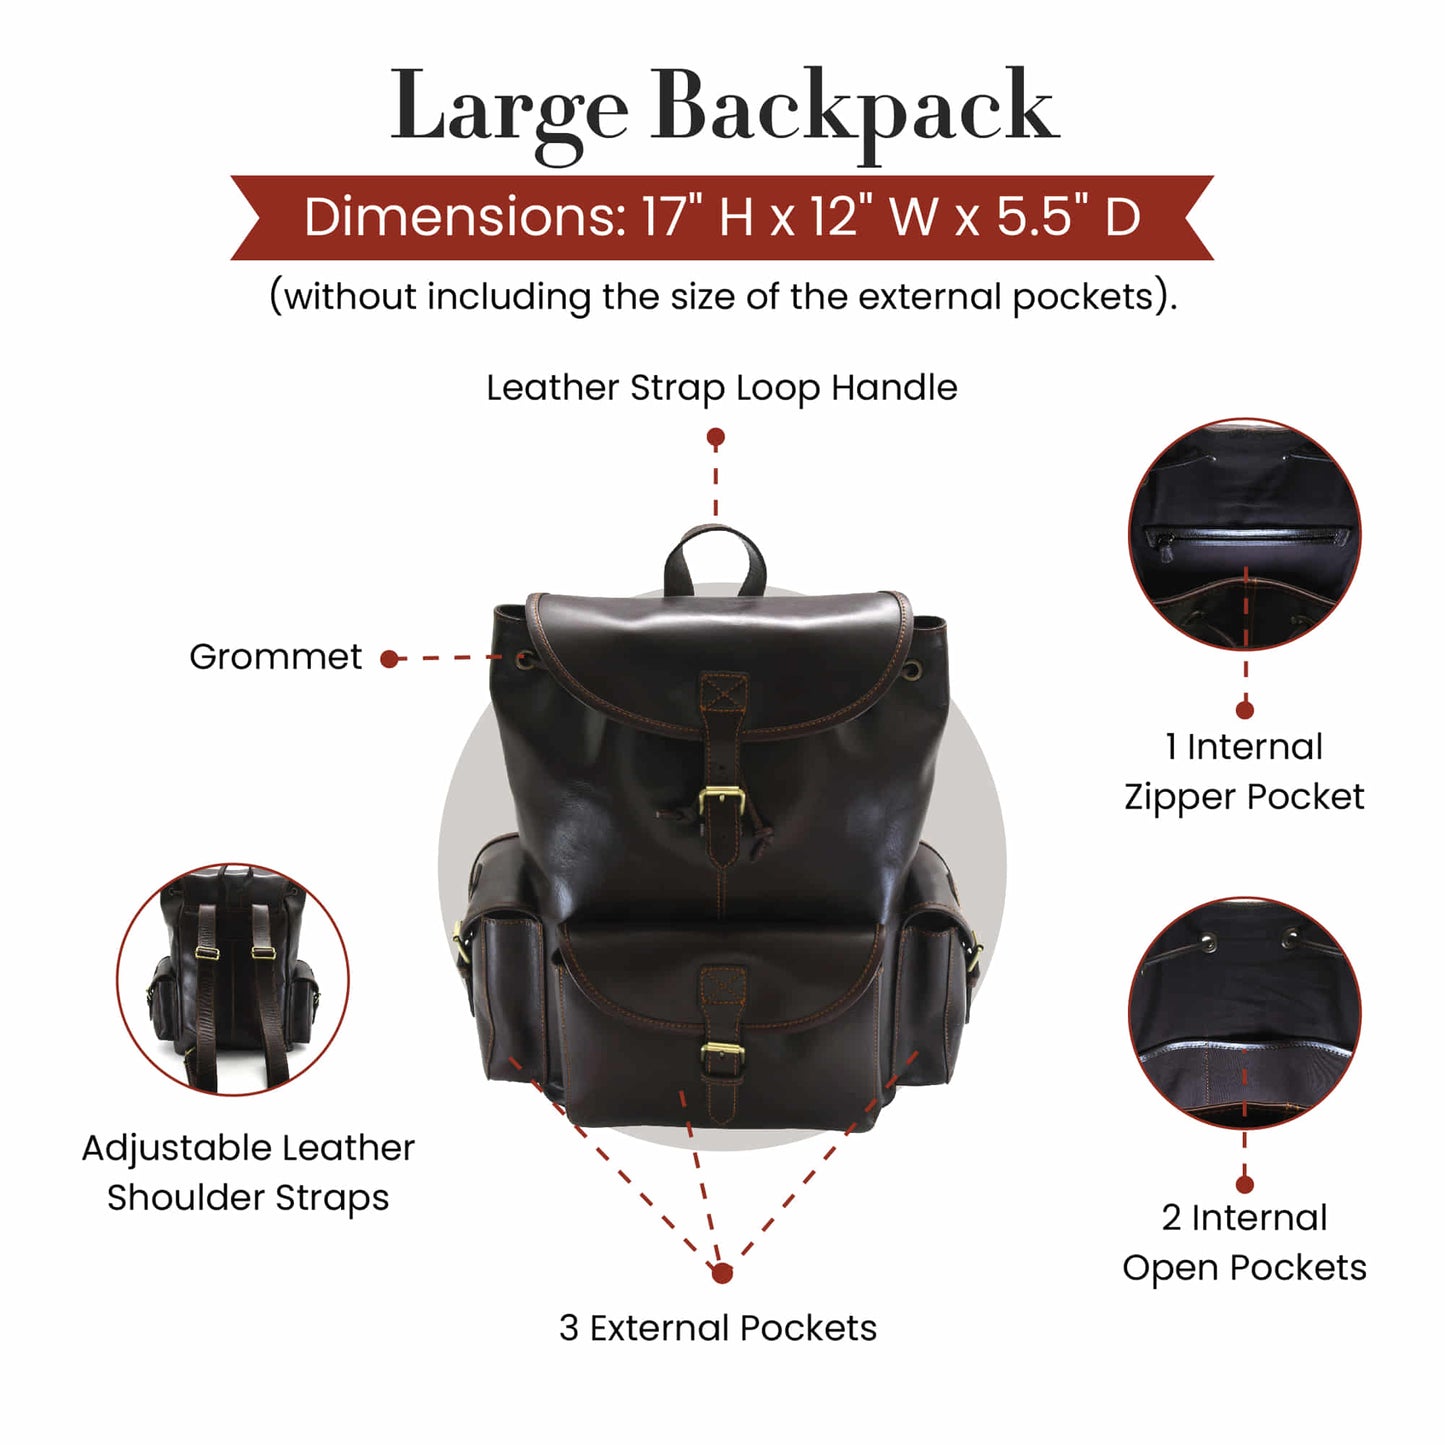 Style n Craft 392150 Backpack Large in Full Grain Dark Brown Leather - Front, Back & Internal Views Showing the Details